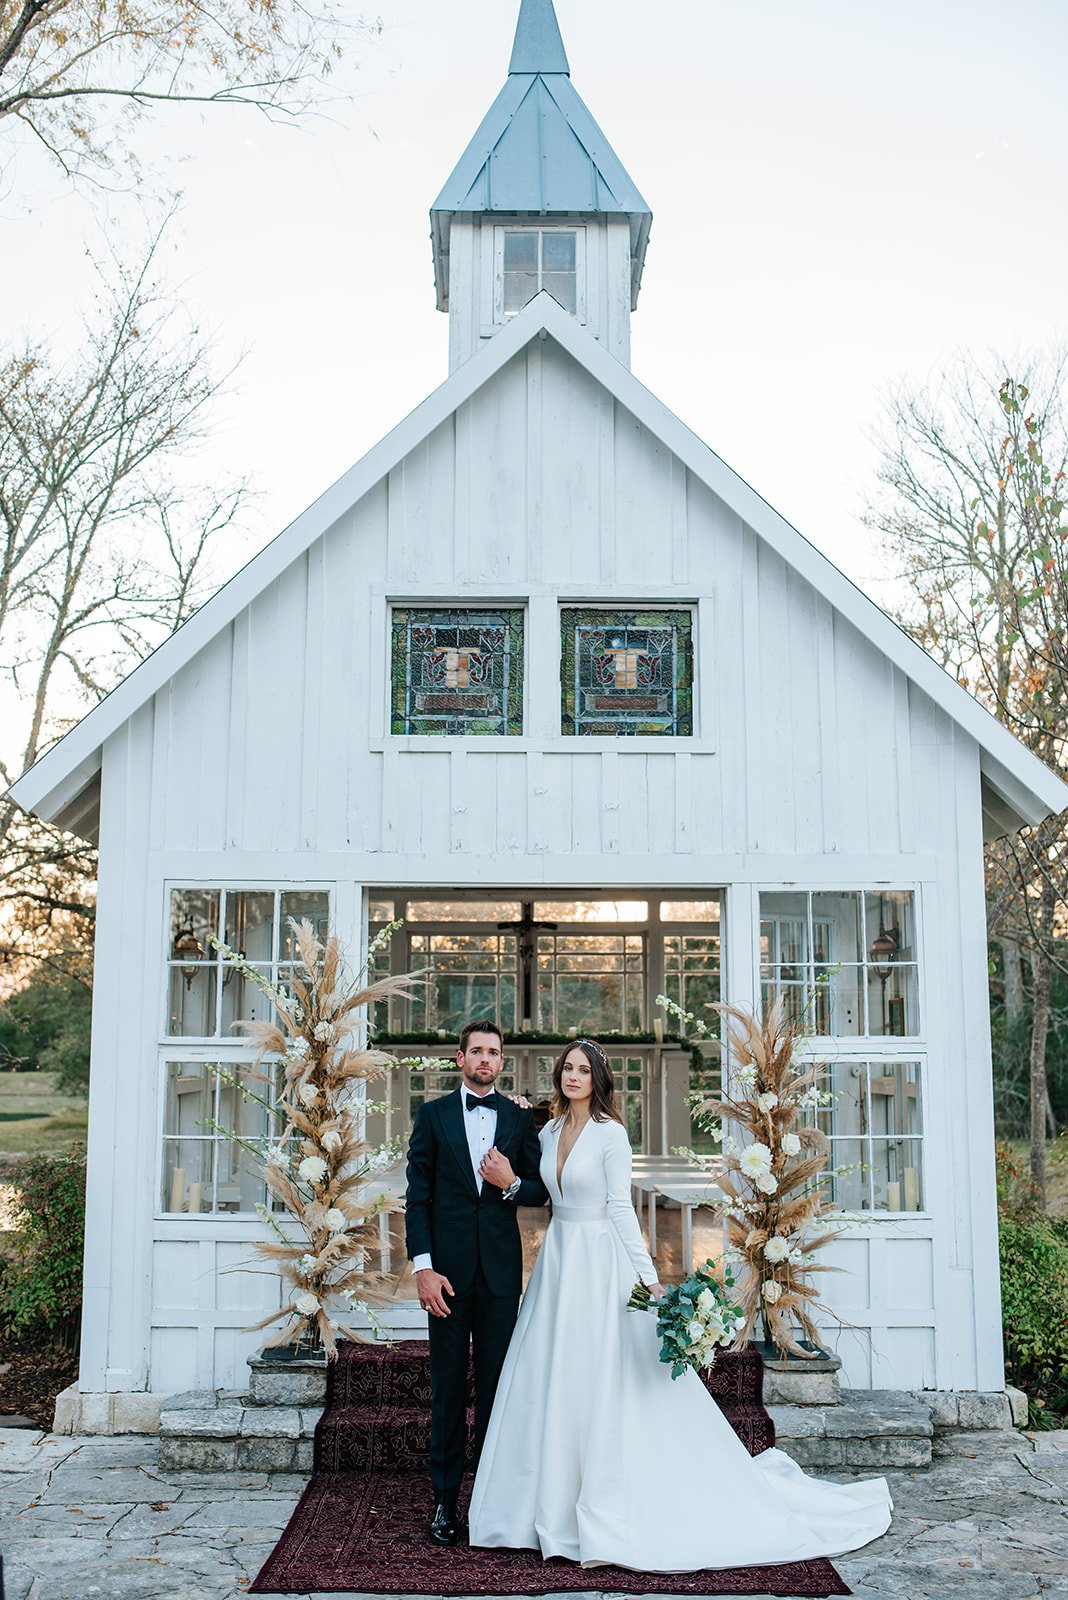 The bride and groom stand in front of the outdoor chapel in College Station, TX at 7F Lodge.